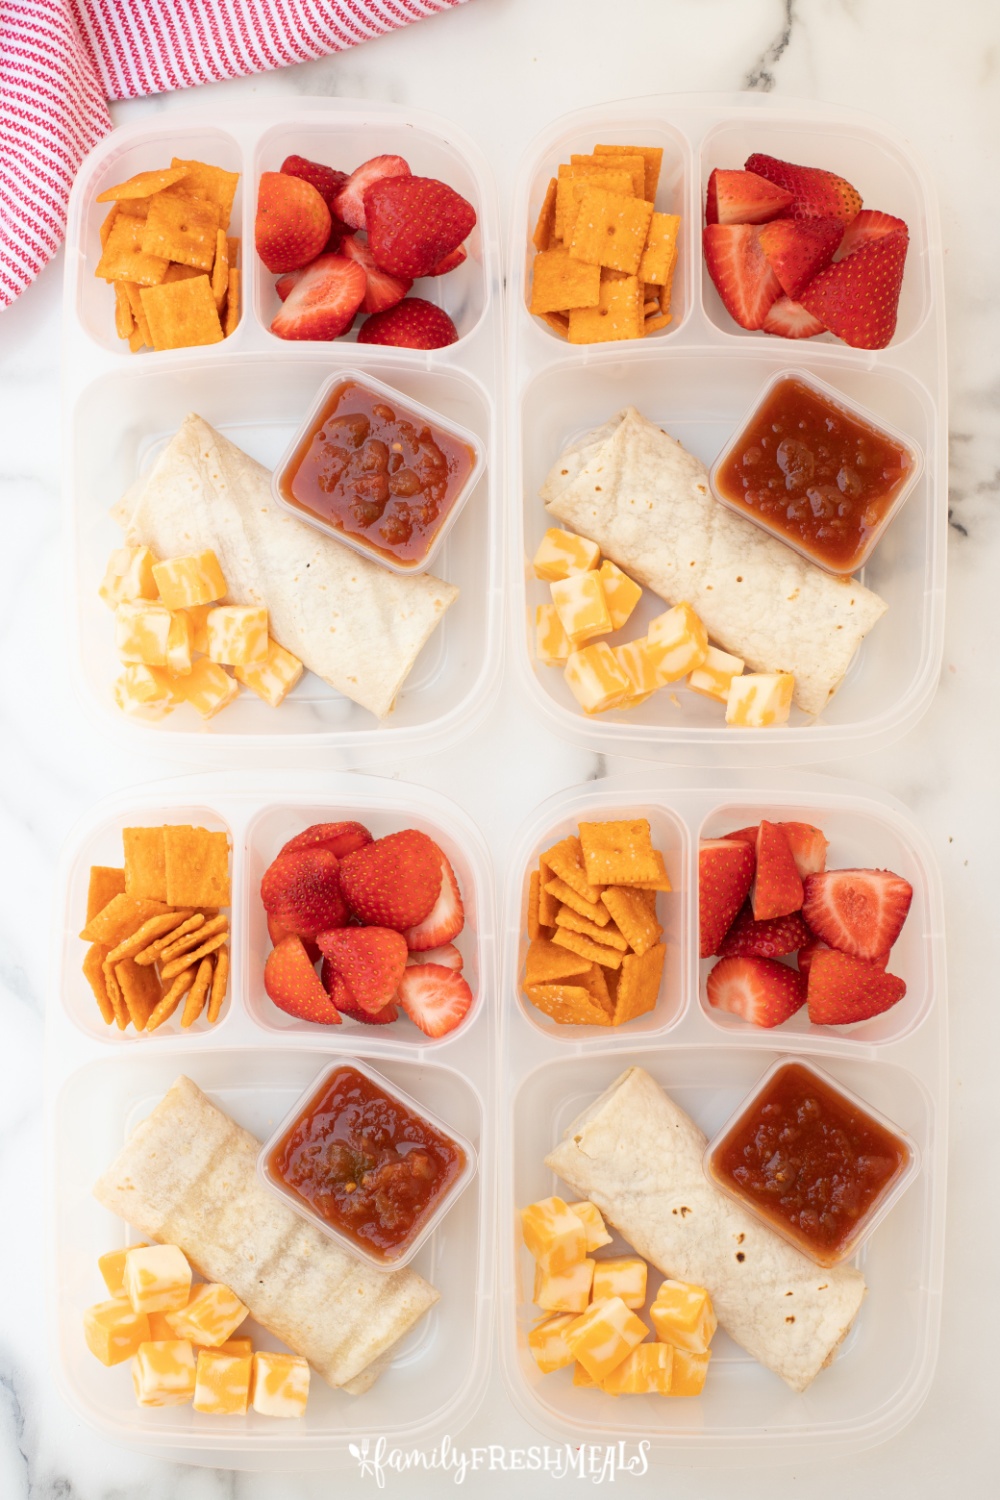 Today I have a new lunch box idea, this time with a Mexican theme. Pack this easy burrito lunch box idea for work or school. via @familyfresh